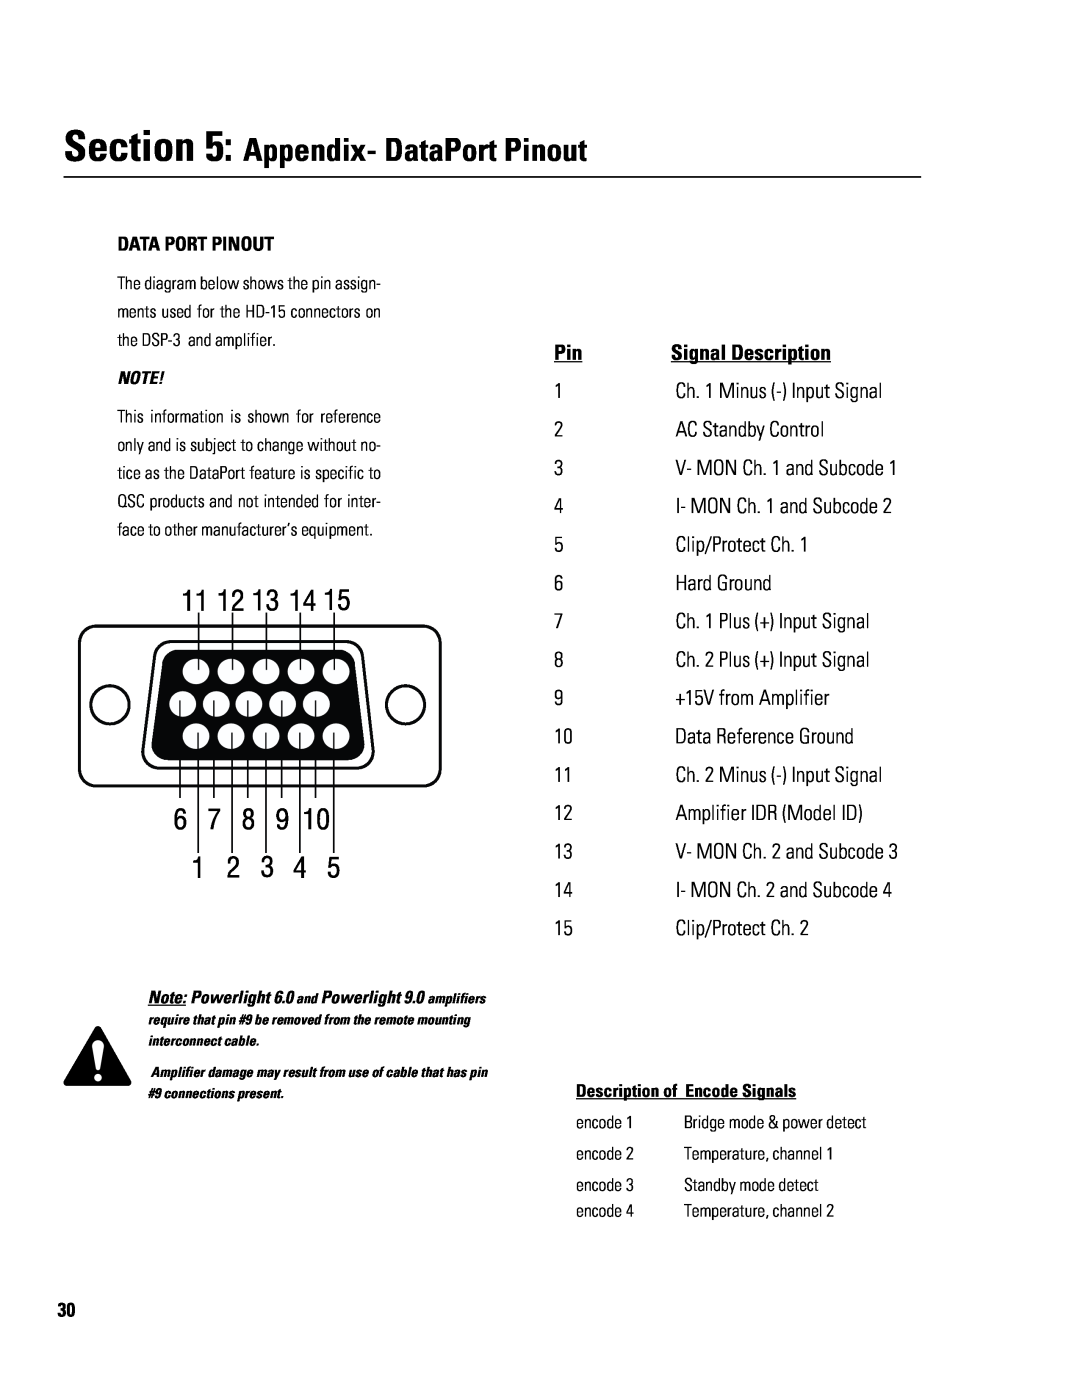 QSC Audio DSP-3 manual Appendix- DataPort Pinout, AC Standby Control, Clip/Protect Ch, Hard Ground, +15V from Amplifier 